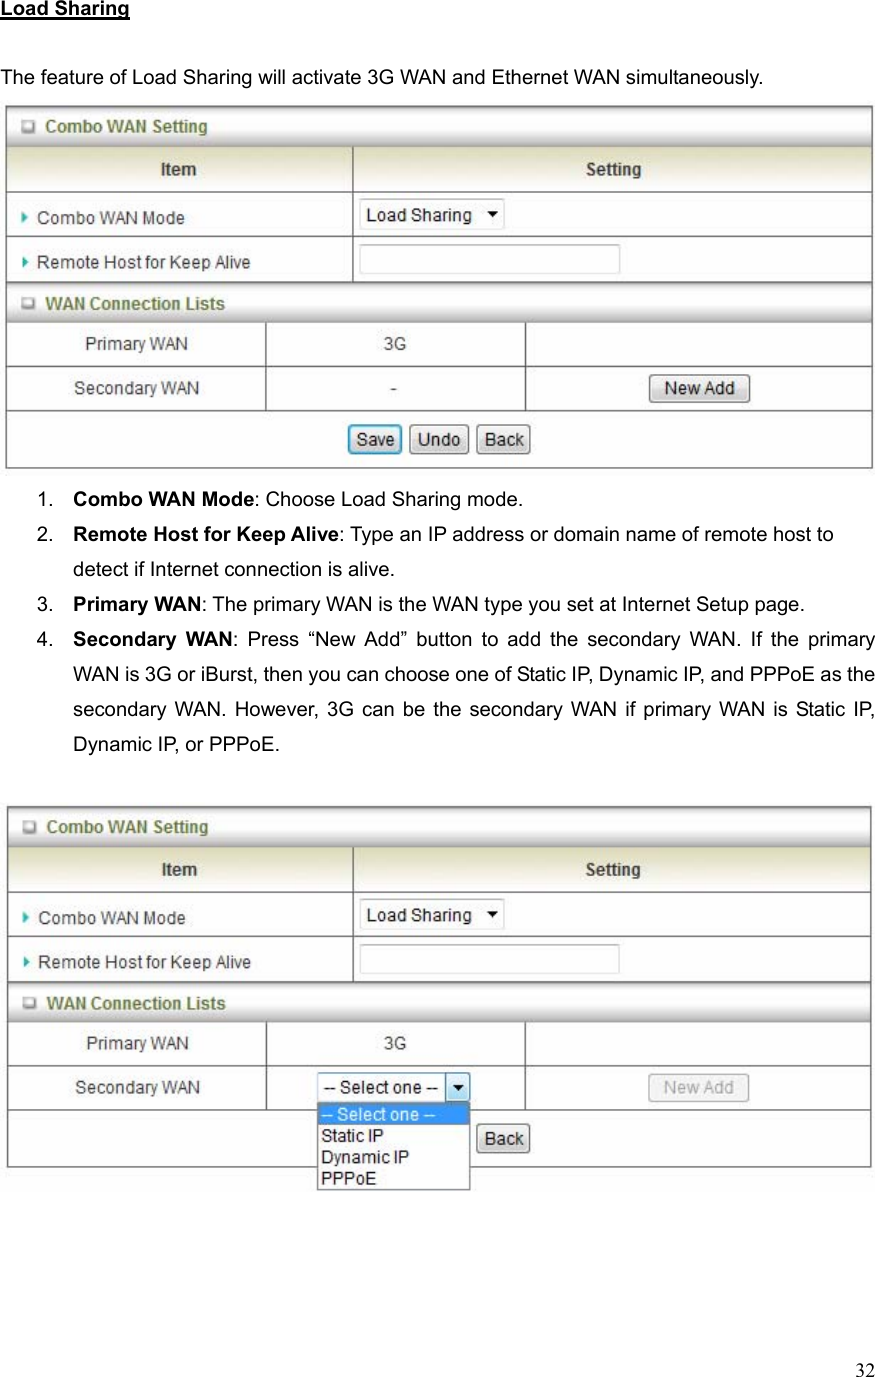  32Load Sharing  The feature of Load Sharing will activate 3G WAN and Ethernet WAN simultaneously.    1.  Combo WAN Mode: Choose Load Sharing mode. 2.  Remote Host for Keep Alive: Type an IP address or domain name of remote host to detect if Internet connection is alive. 3.  Primary WAN: The primary WAN is the WAN type you set at Internet Setup page.   4.  Secondary WAN: Press “New Add” button to add the secondary WAN. If the primary WAN is 3G or iBurst, then you can choose one of Static IP, Dynamic IP, and PPPoE as the secondary WAN. However, 3G can be the secondary WAN if primary WAN is Static IP, Dynamic IP, or PPPoE.      